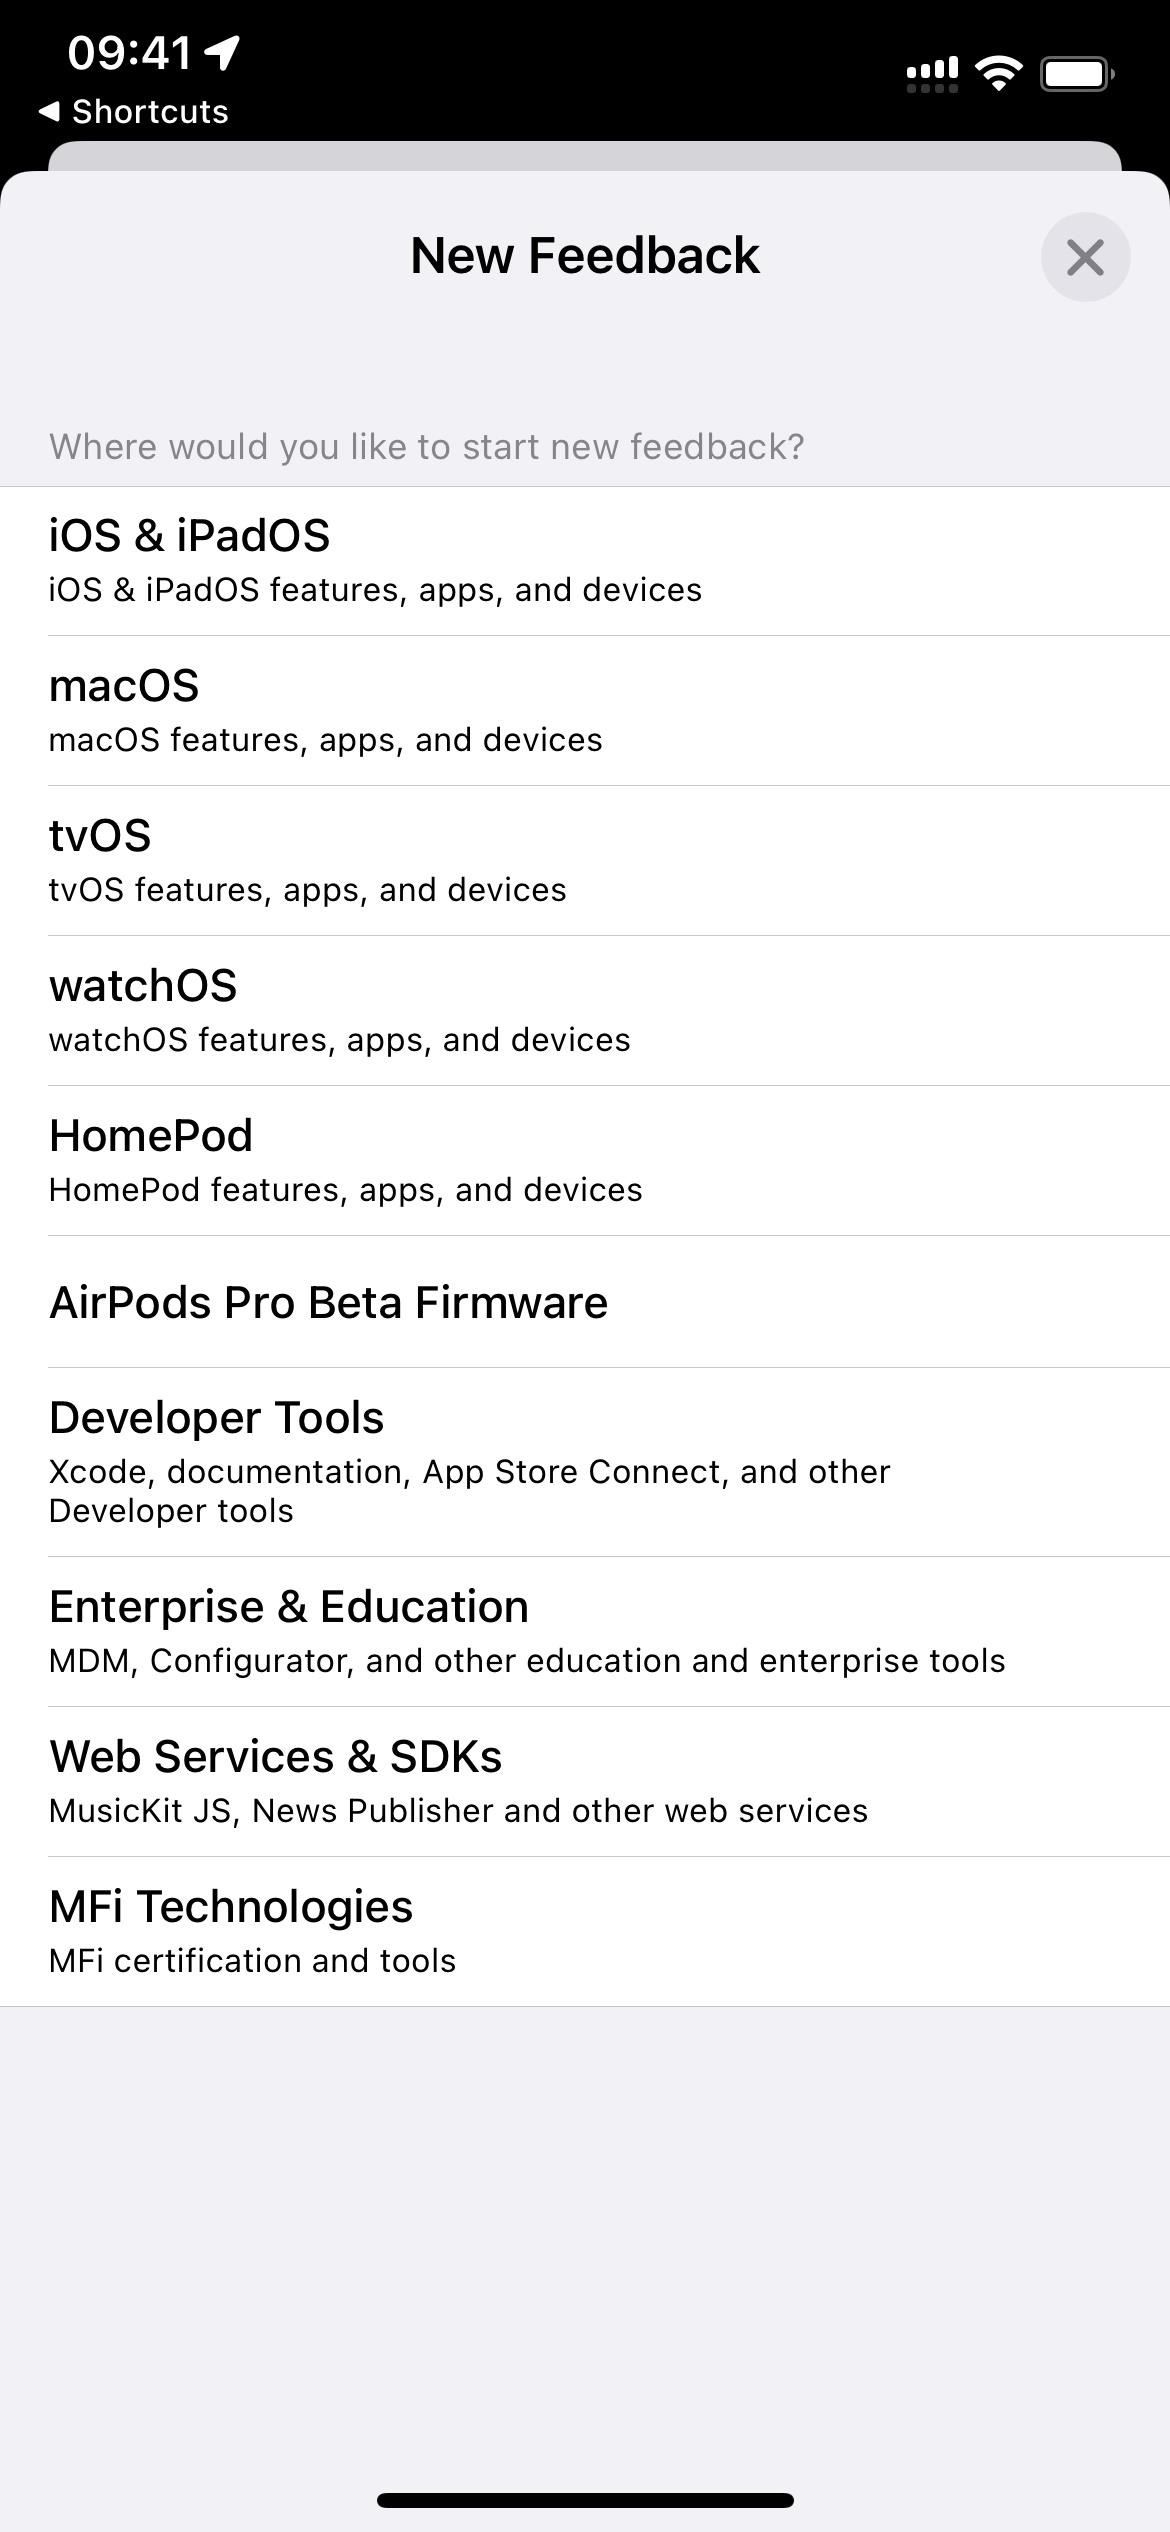 11 Hidden iOS Features You Won't Find in Any Apple Docs